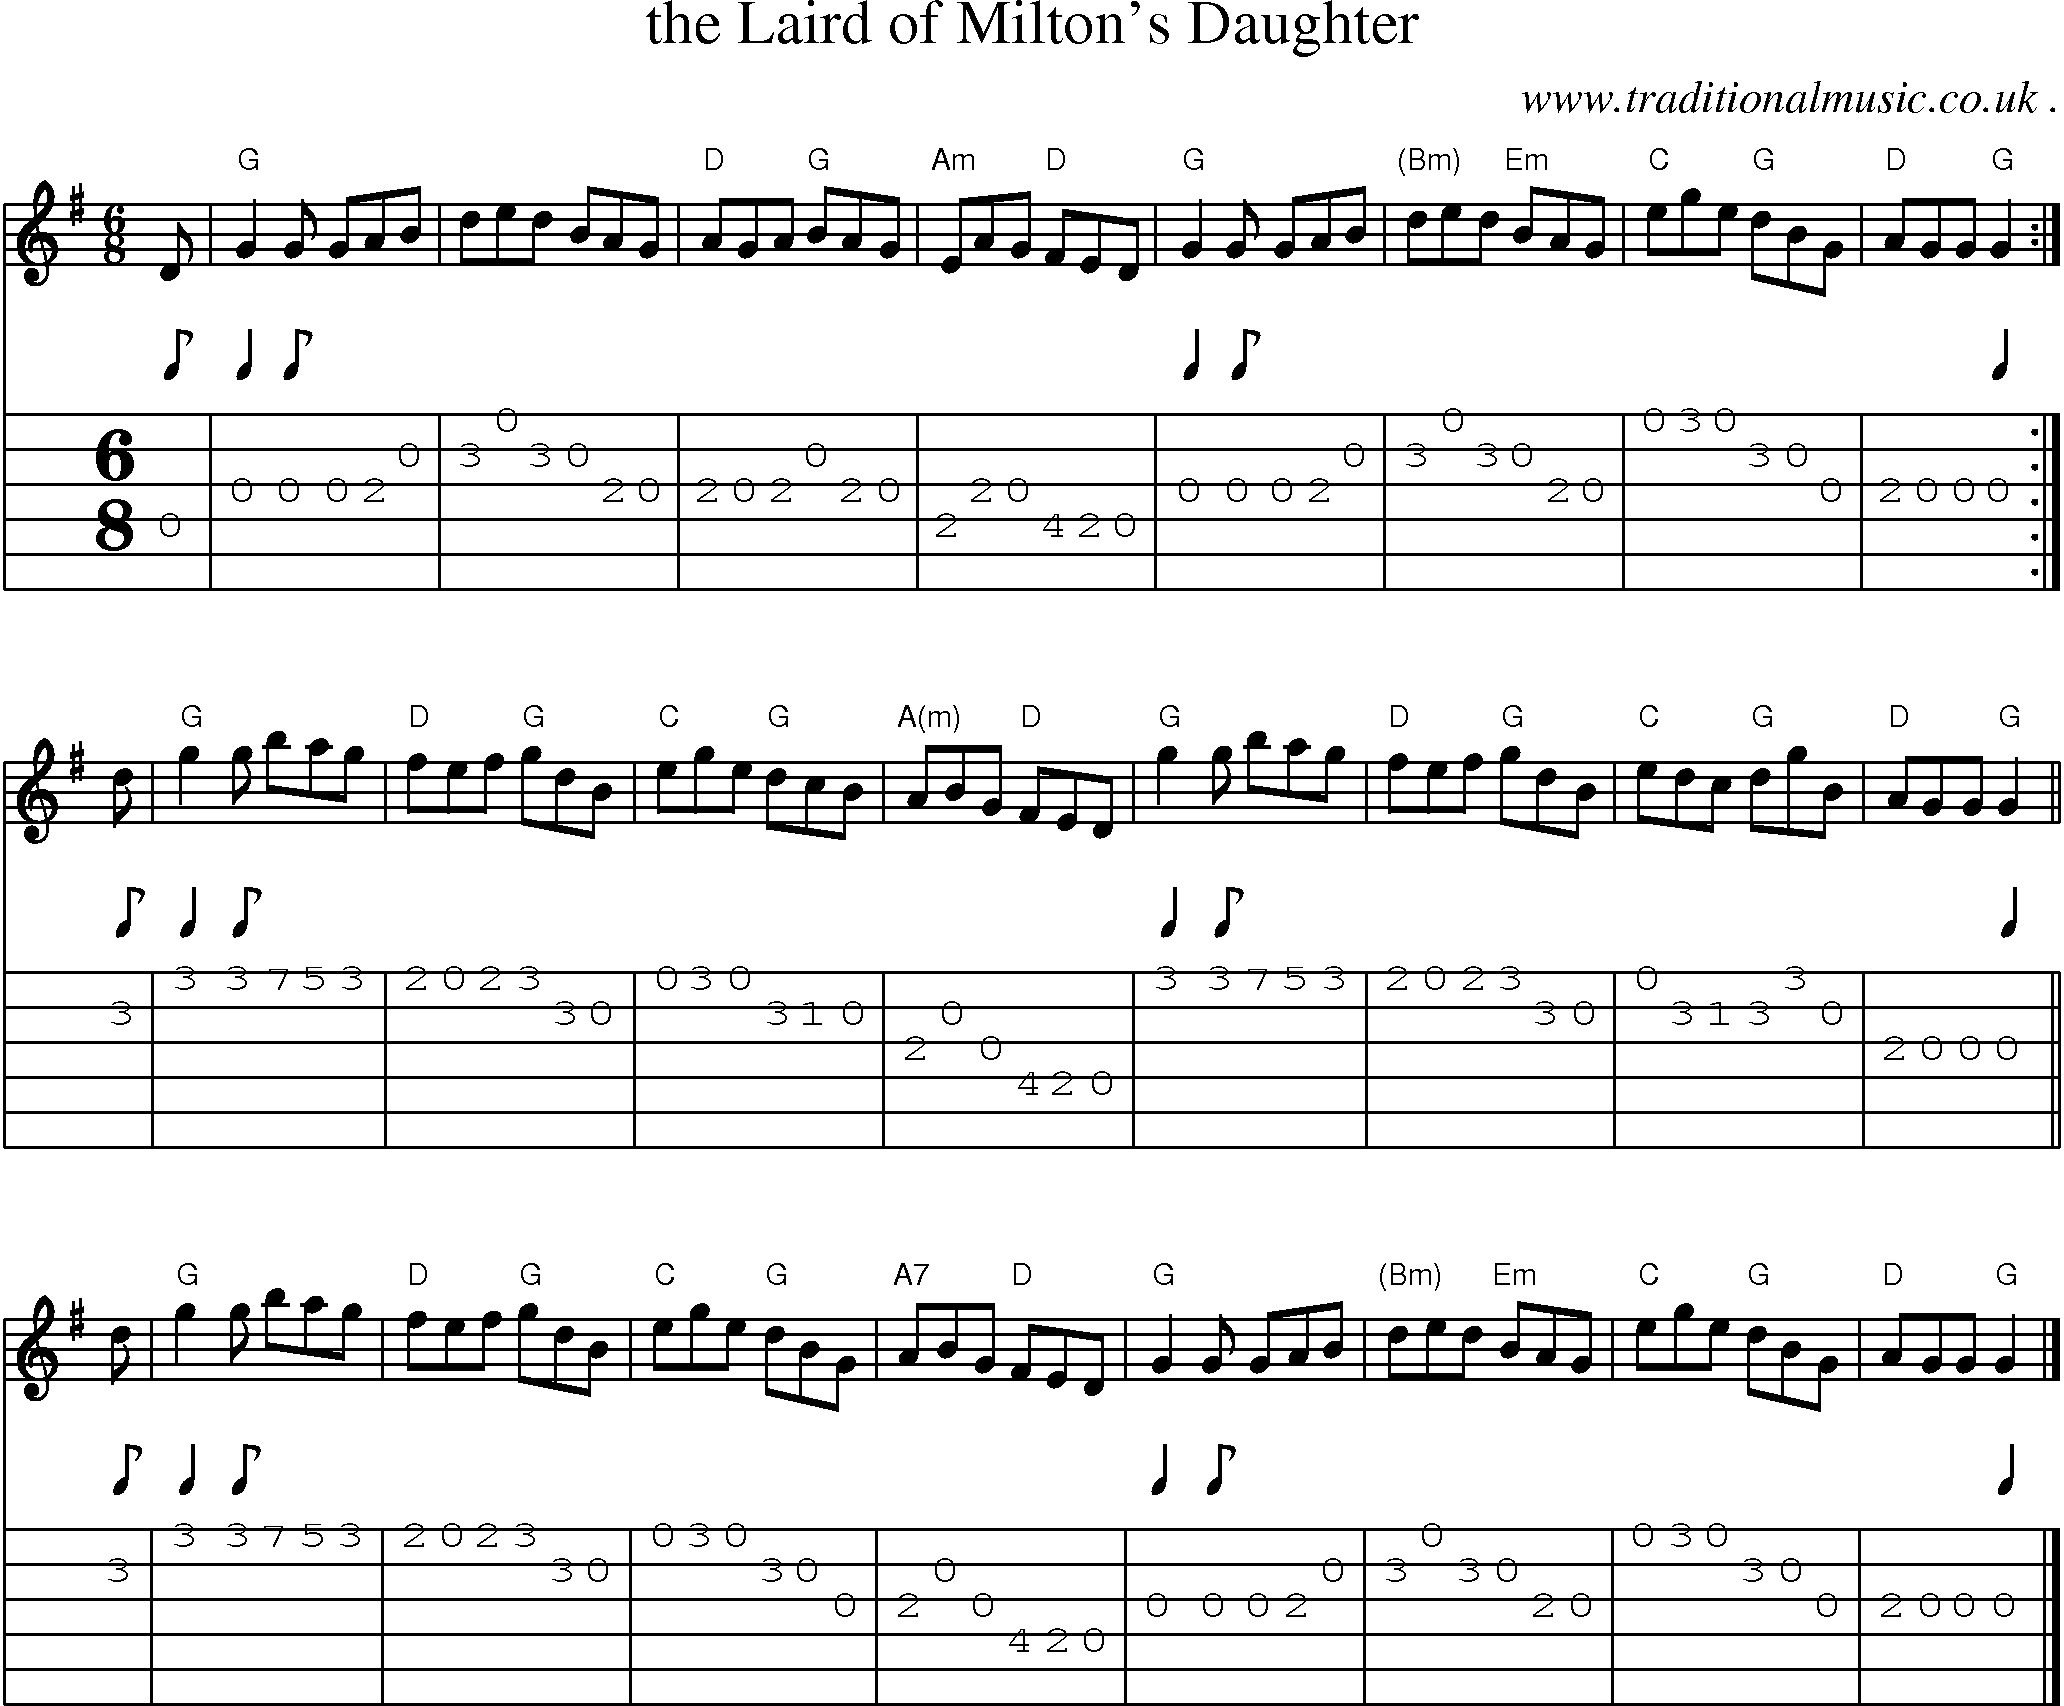 Sheet-music  score, Chords and Guitar Tabs for The Laird Of Miltons Daughter